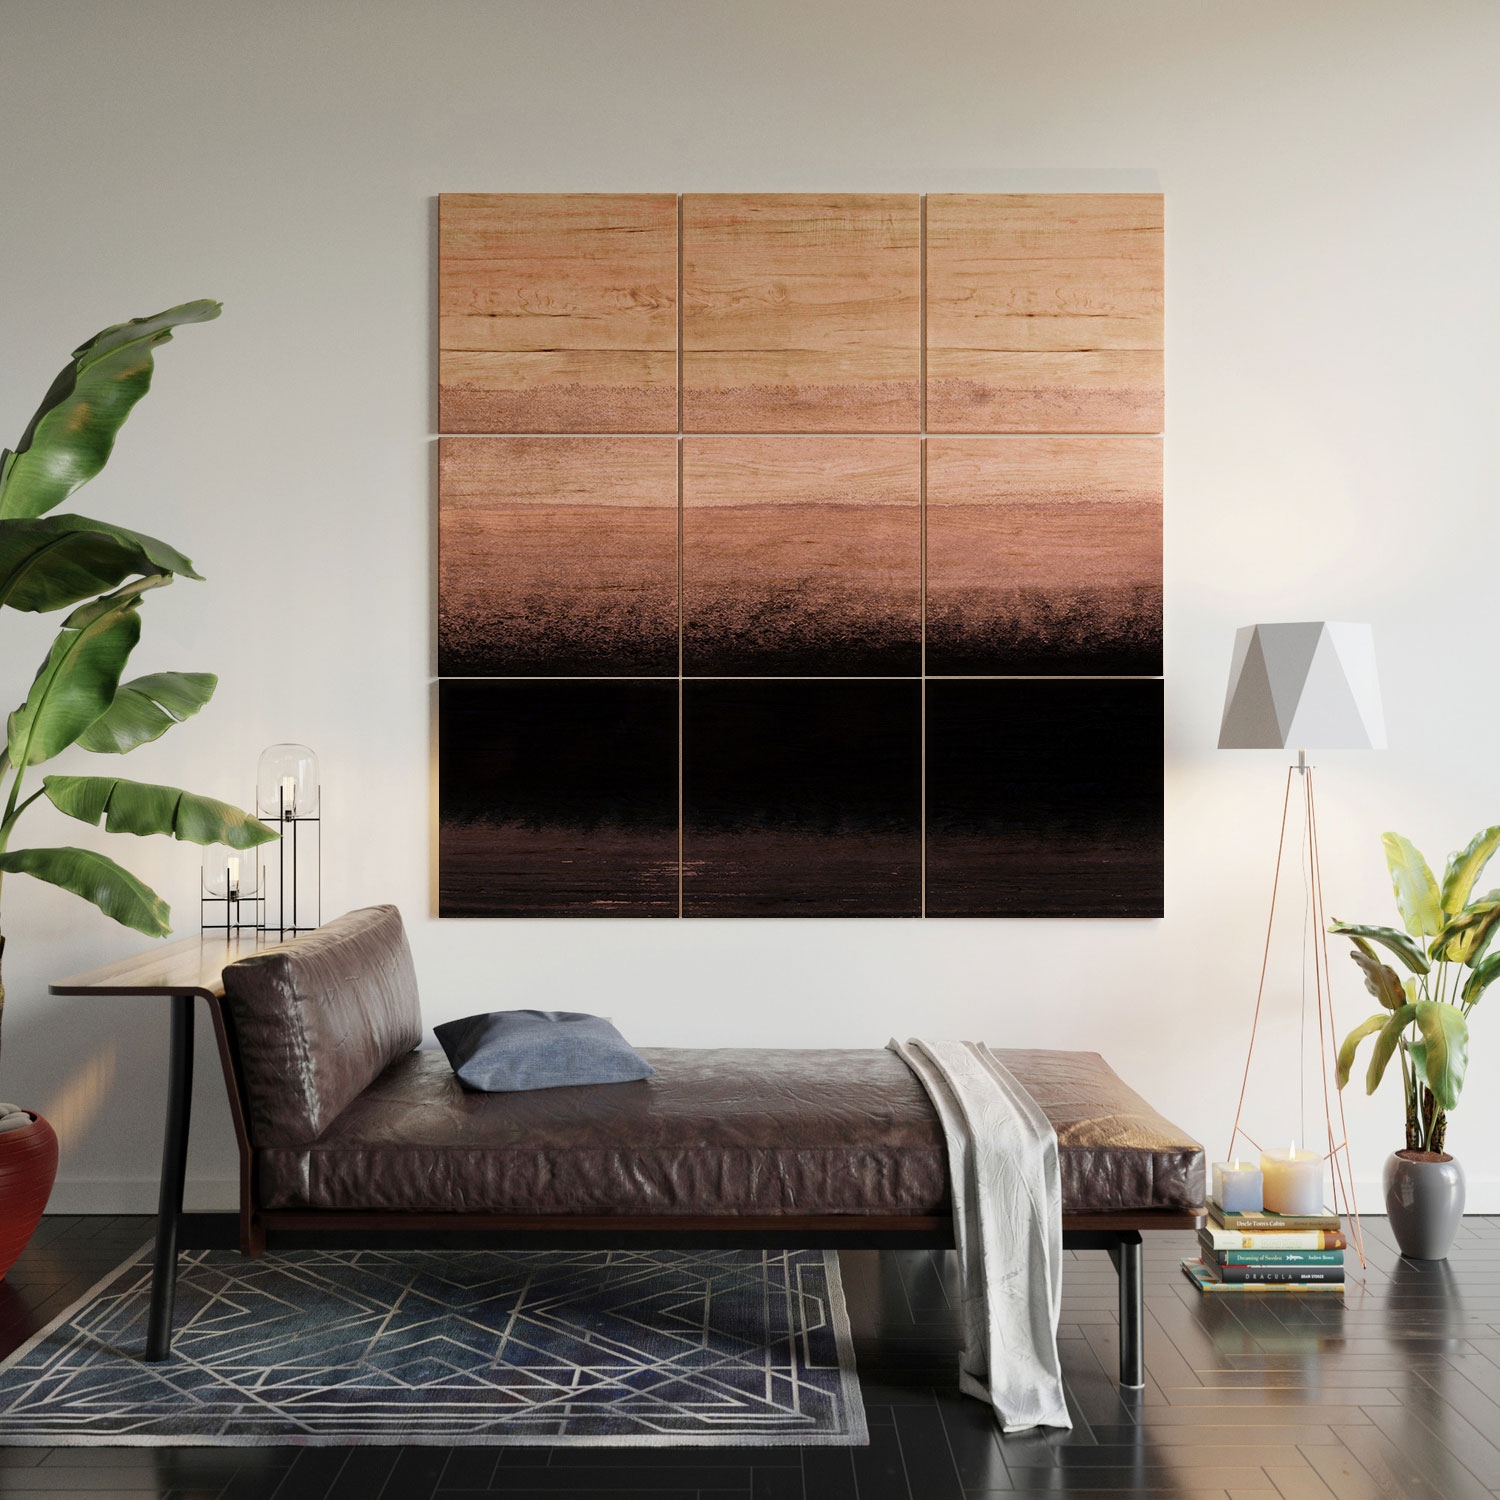 Shades Of Pink by Iris Lehnhardt - Wood Wall Mural5' x 5' (Nine 20" wood Squares) - Image 4